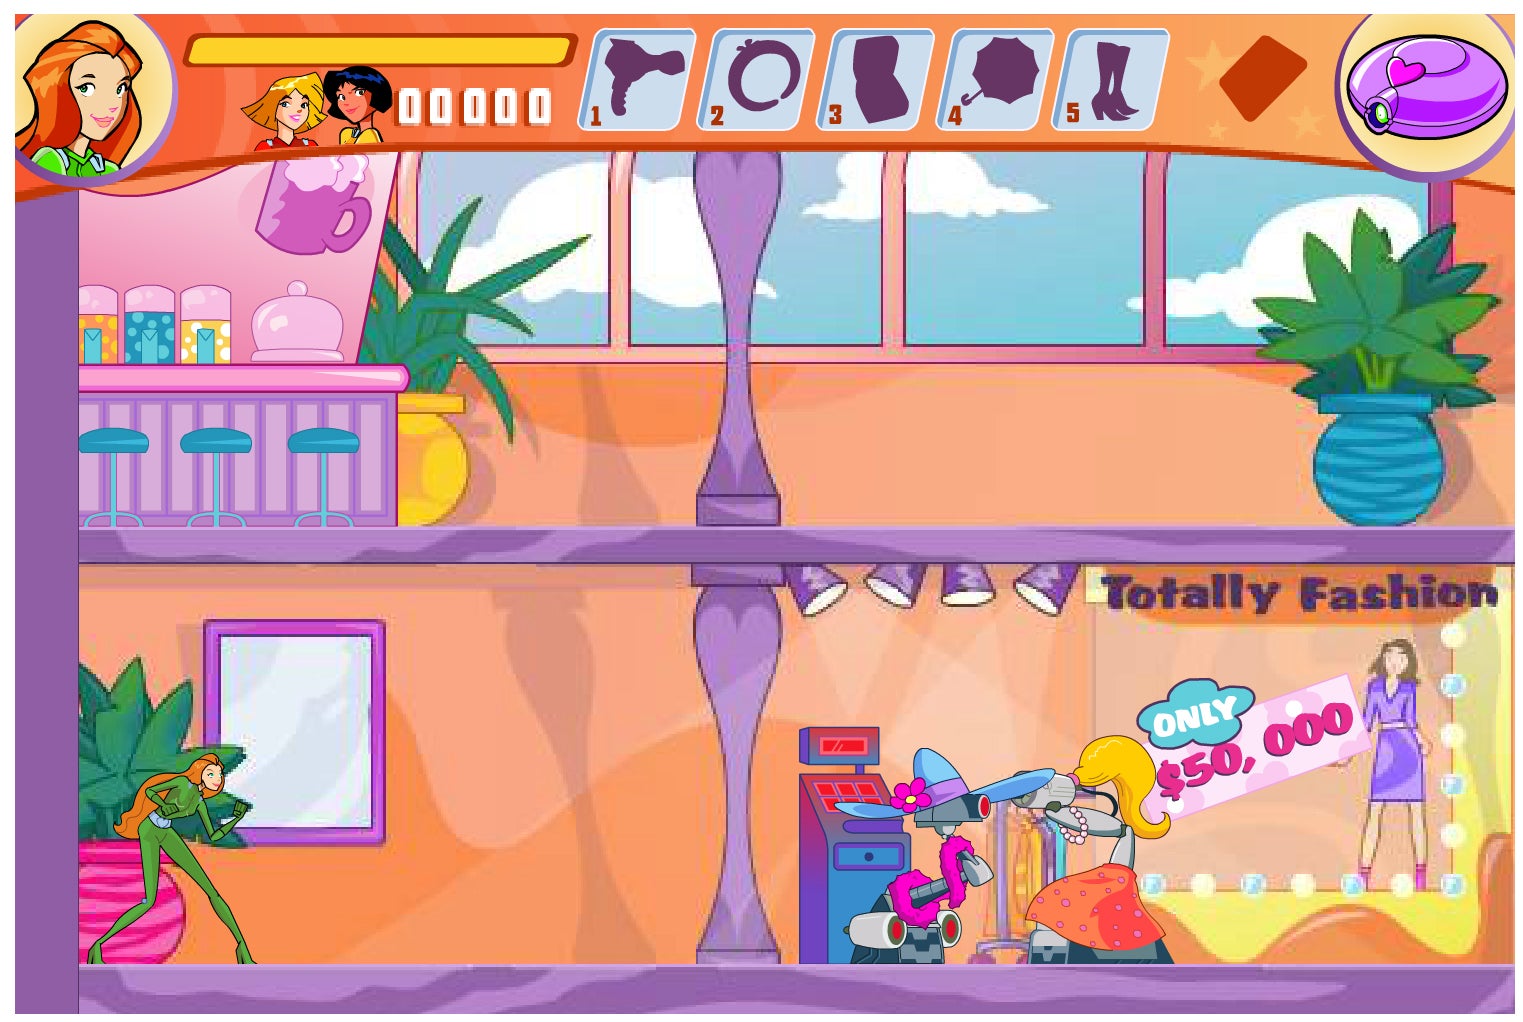 What are some old browser games y'all miss? A few of my old